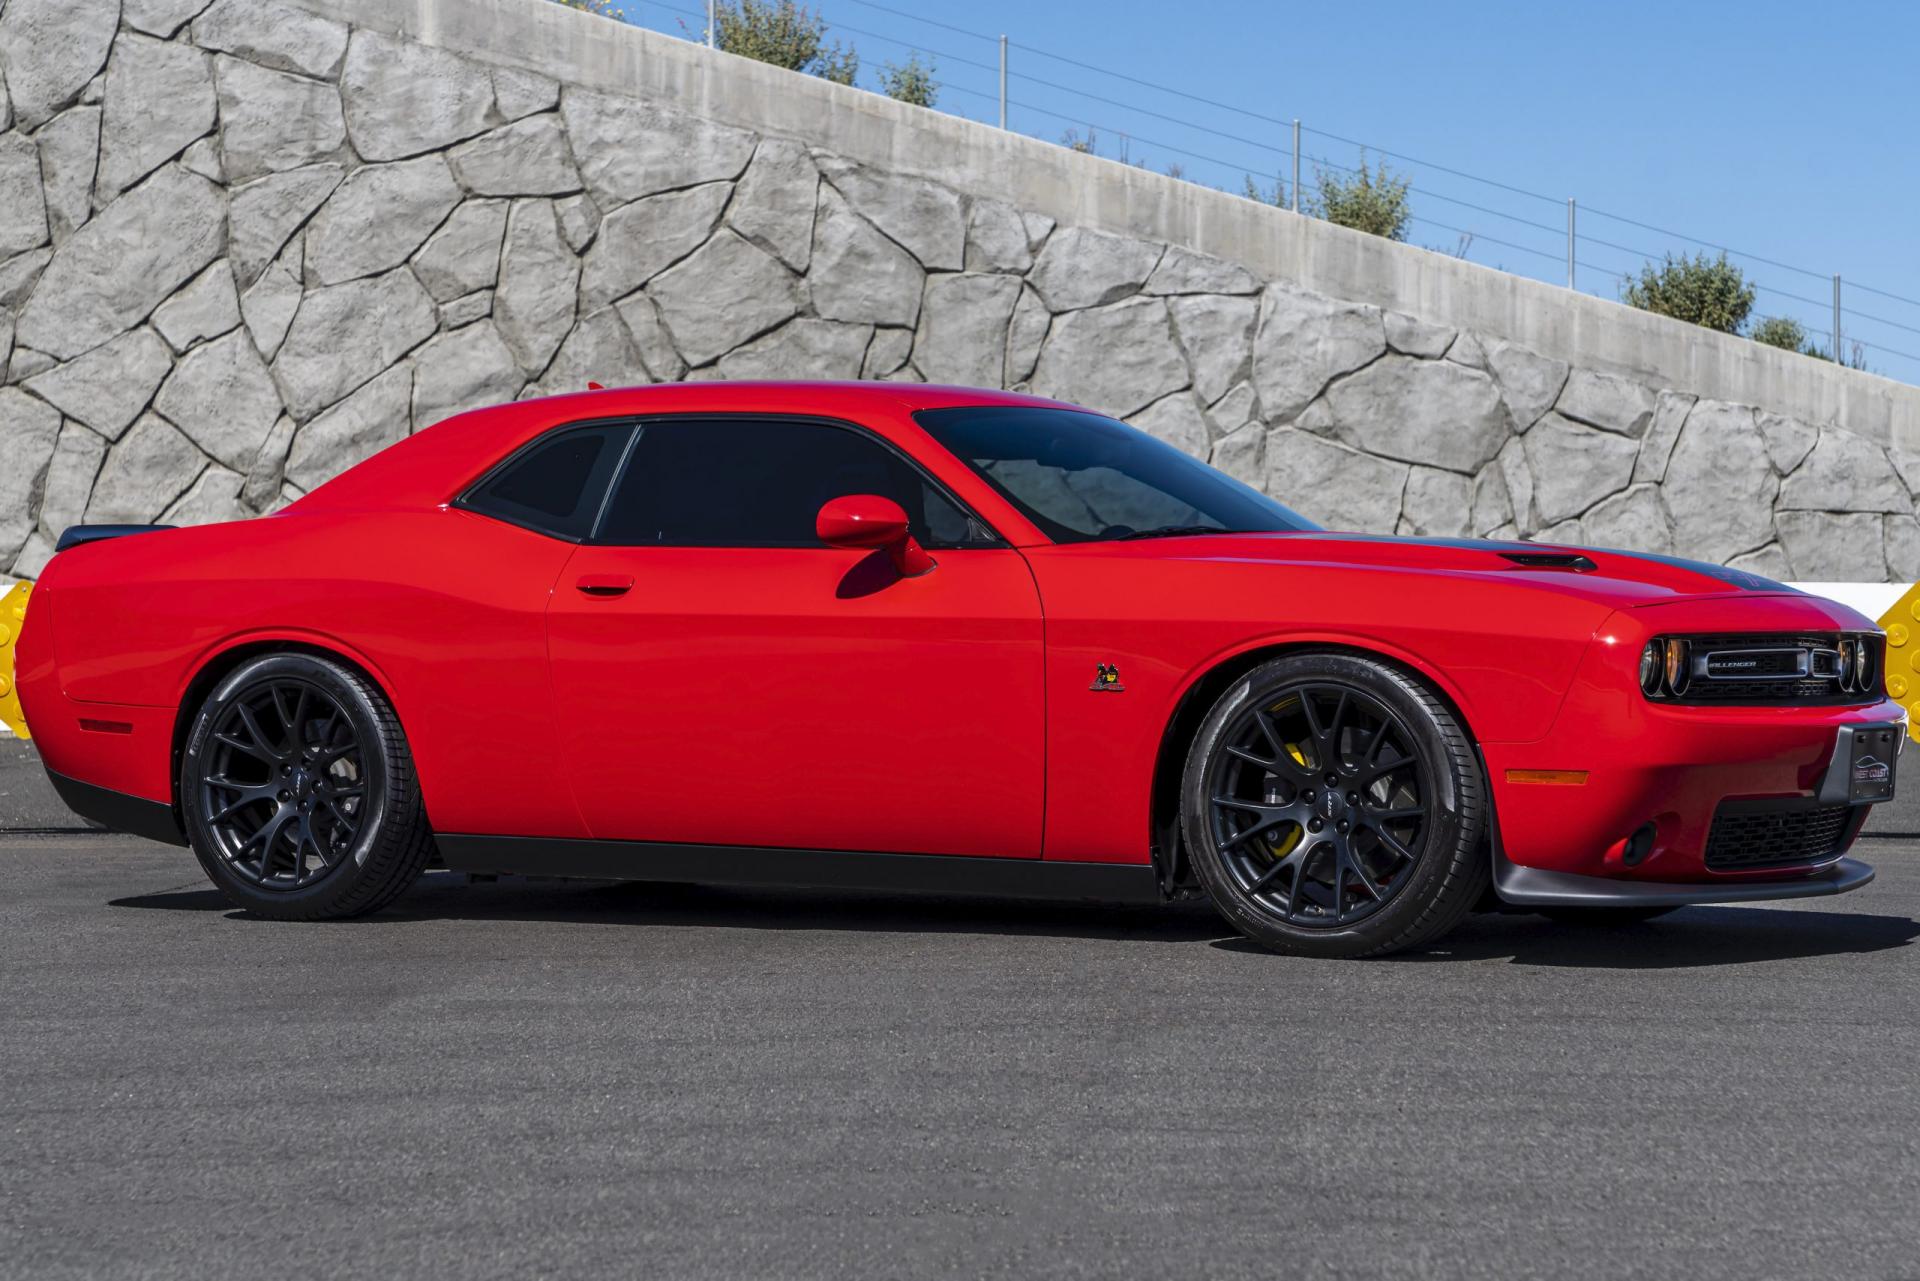 Used 2016 Challenger Hellcat For Sale (Sold) | West Coast Exotic Stock #C1927